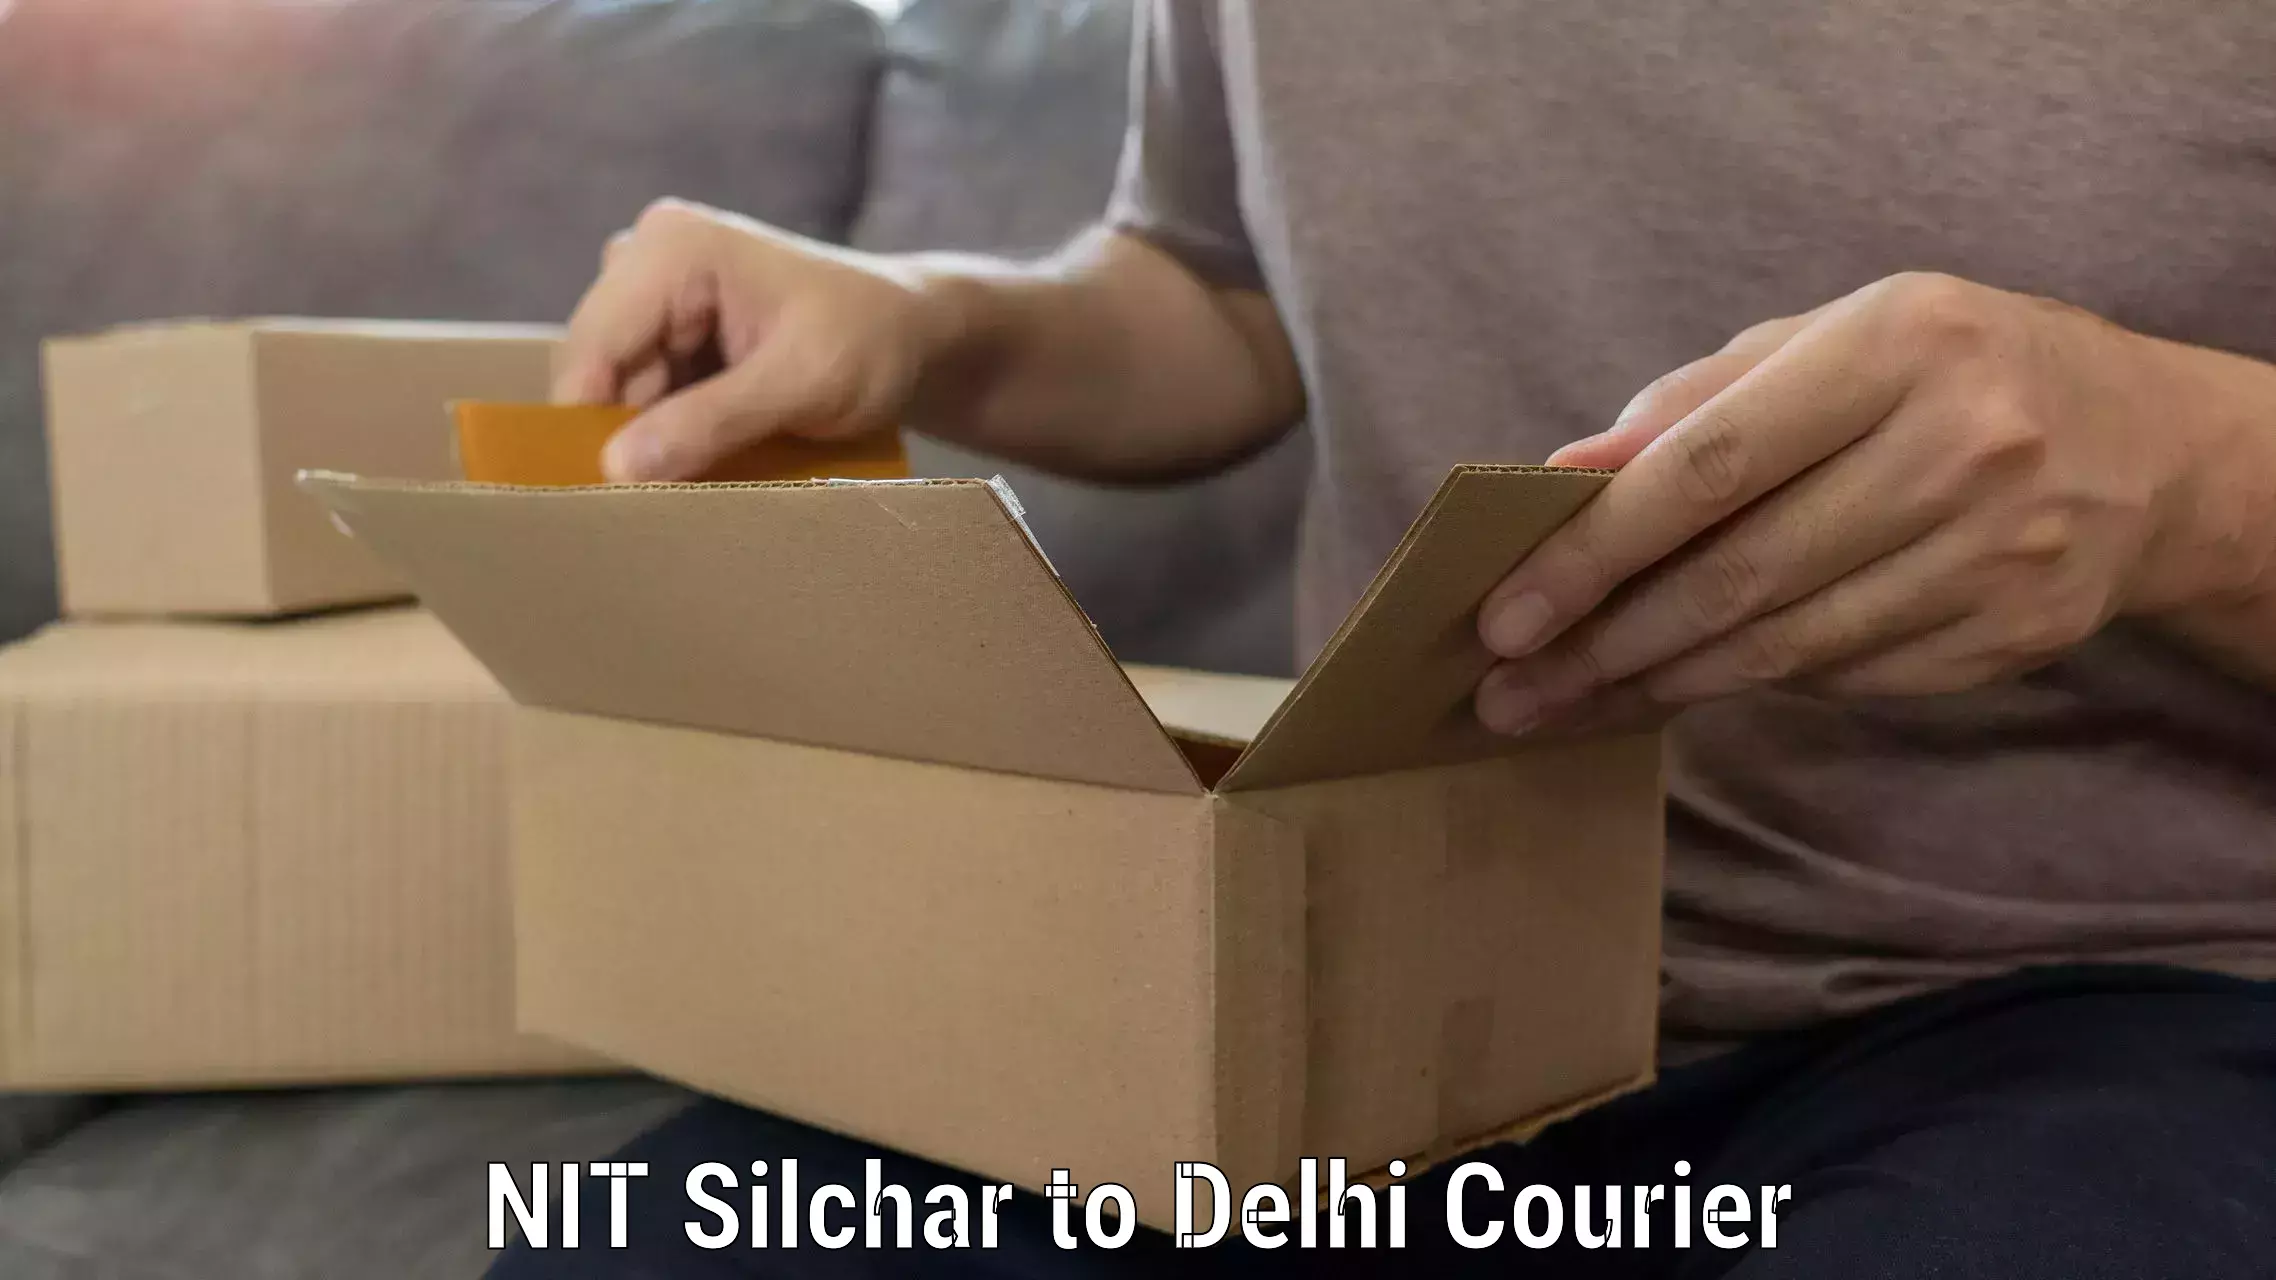 Quality relocation assistance NIT Silchar to Lodhi Road